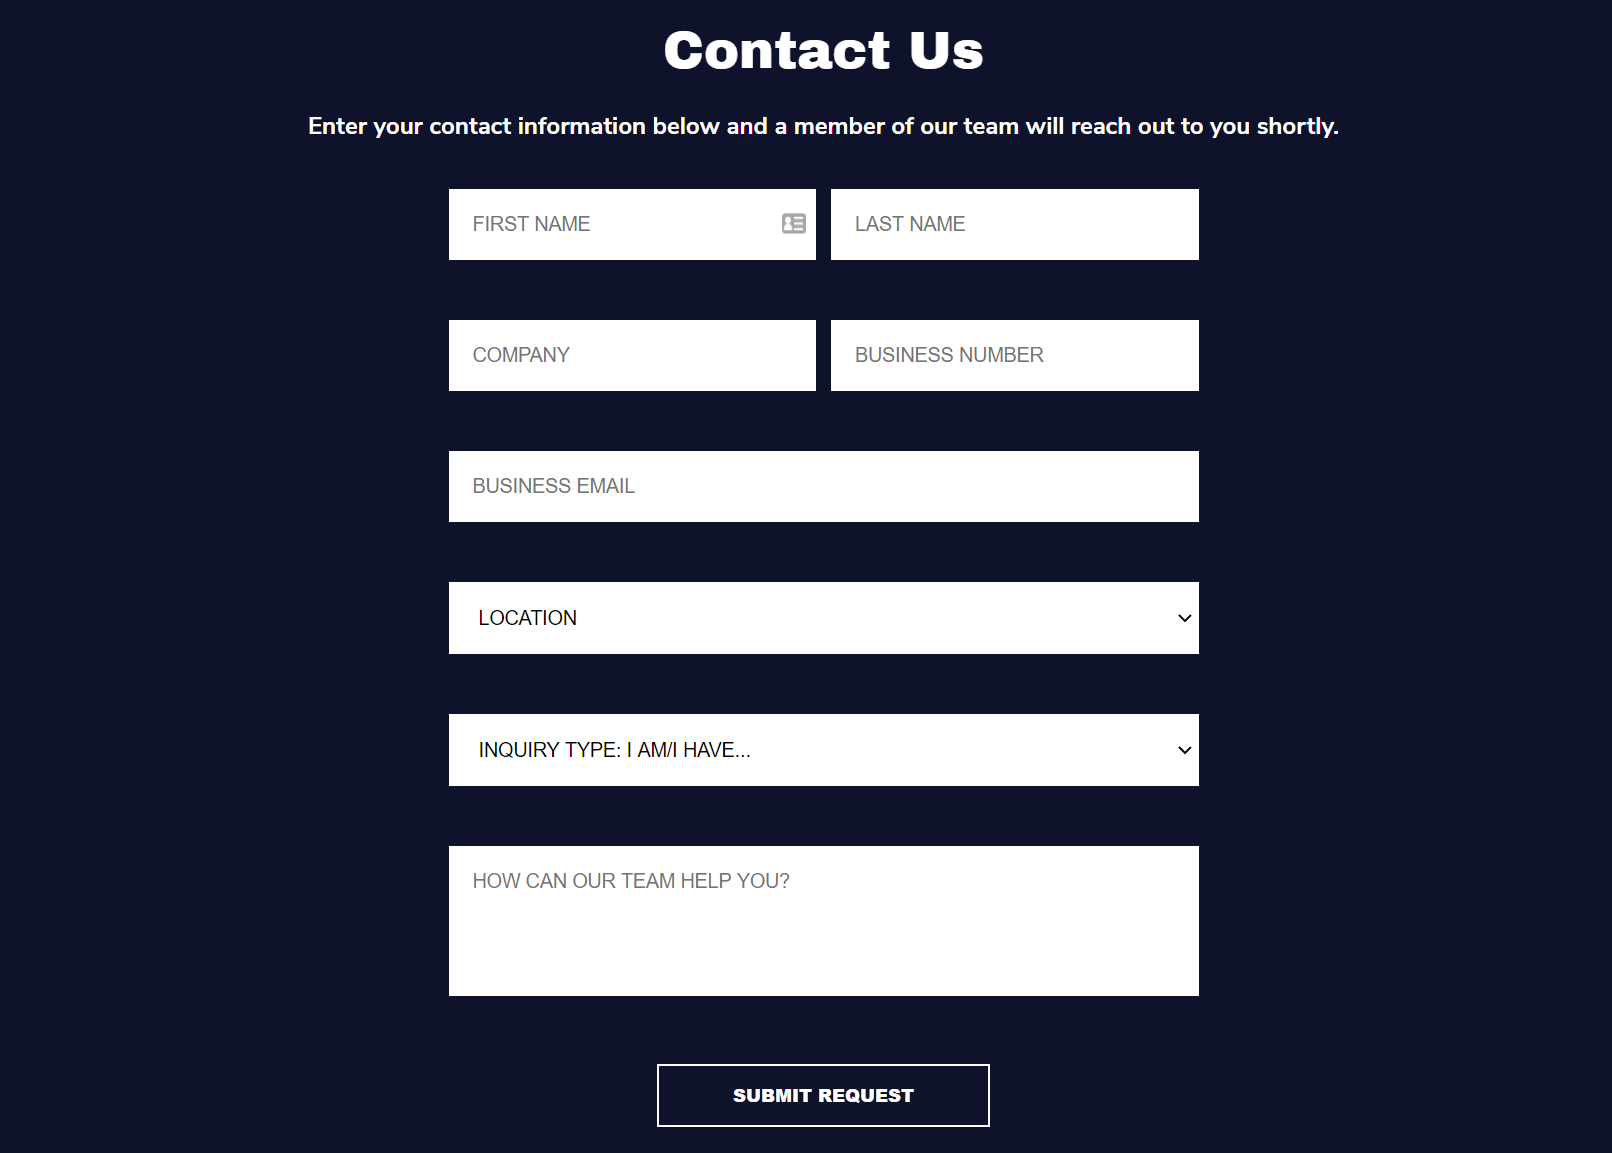 screen shot of contact us form with no offer